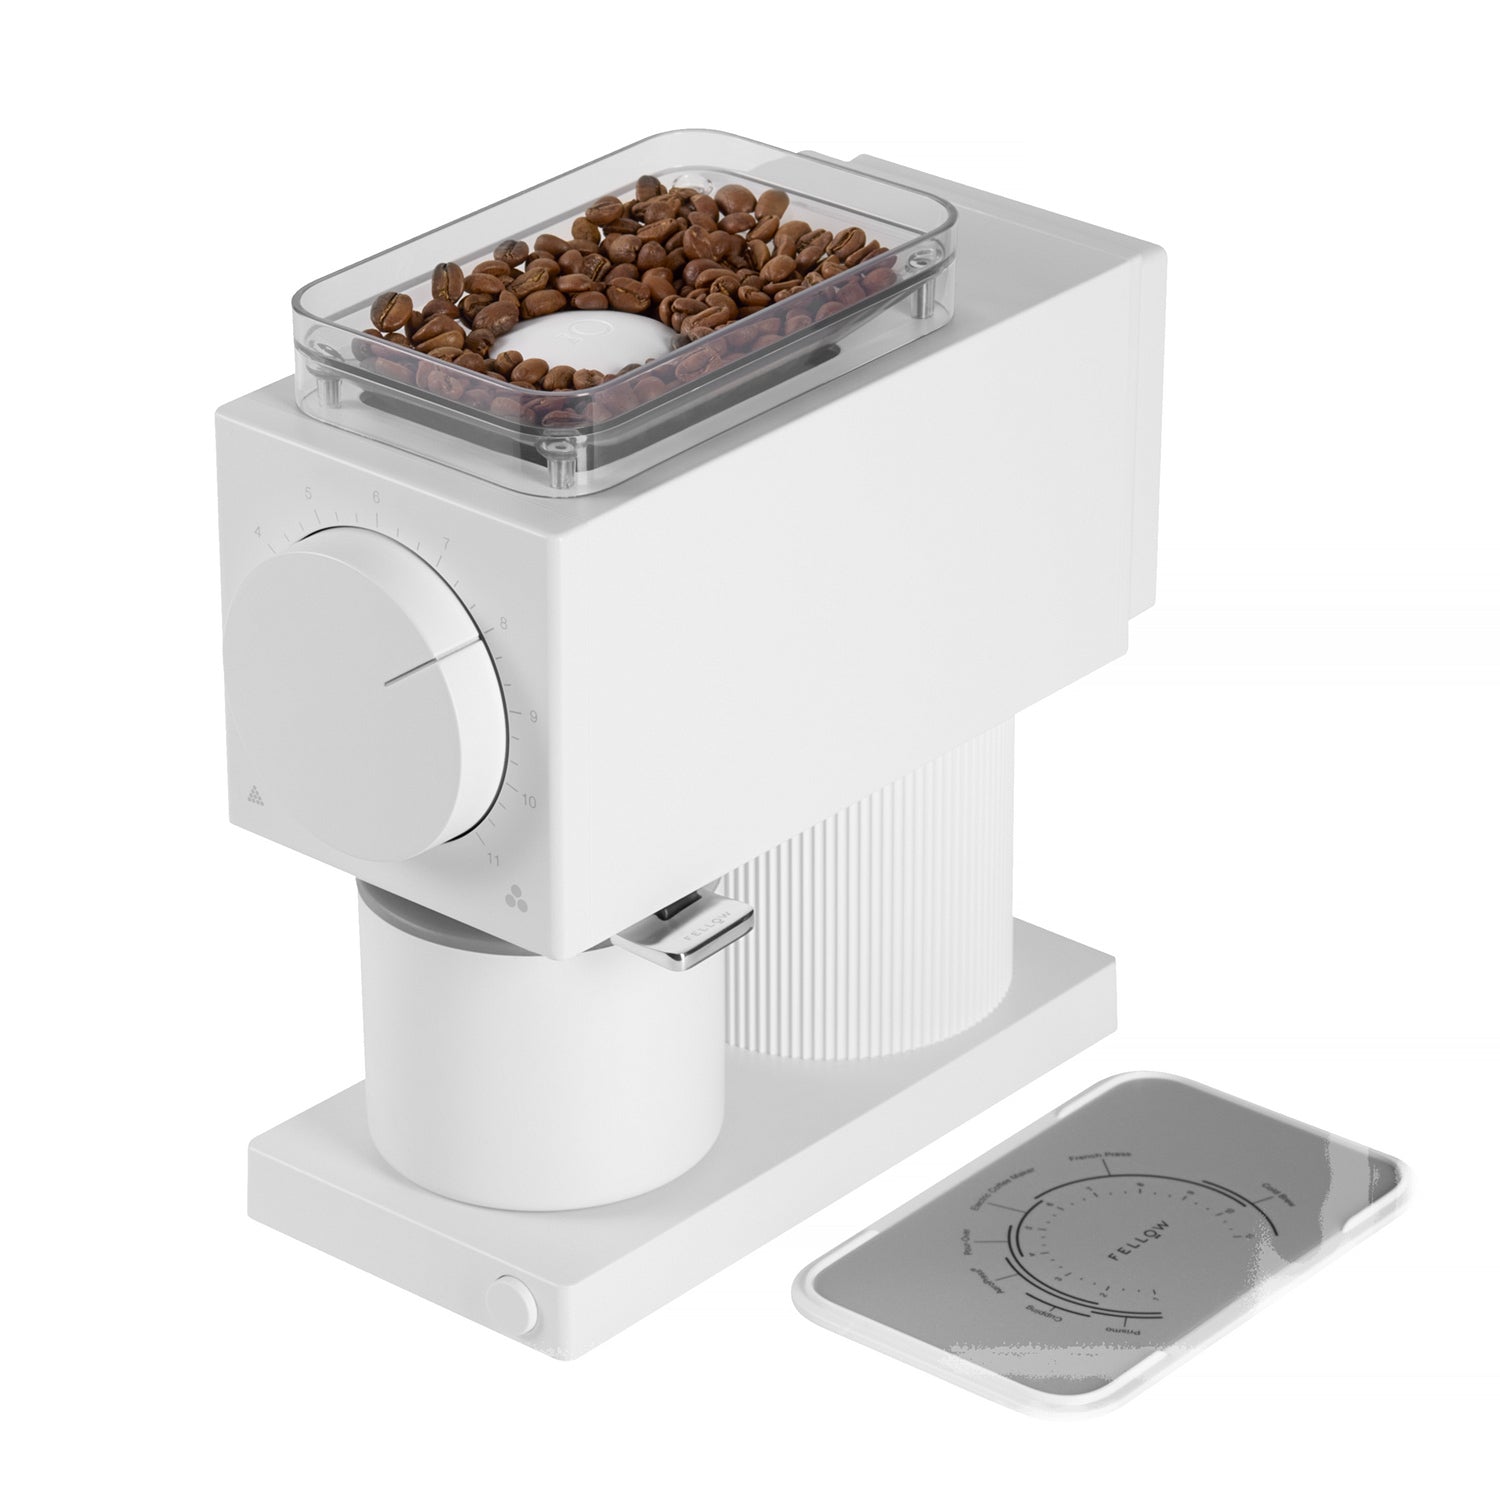 FELLOW ODE coffee grinder (White)